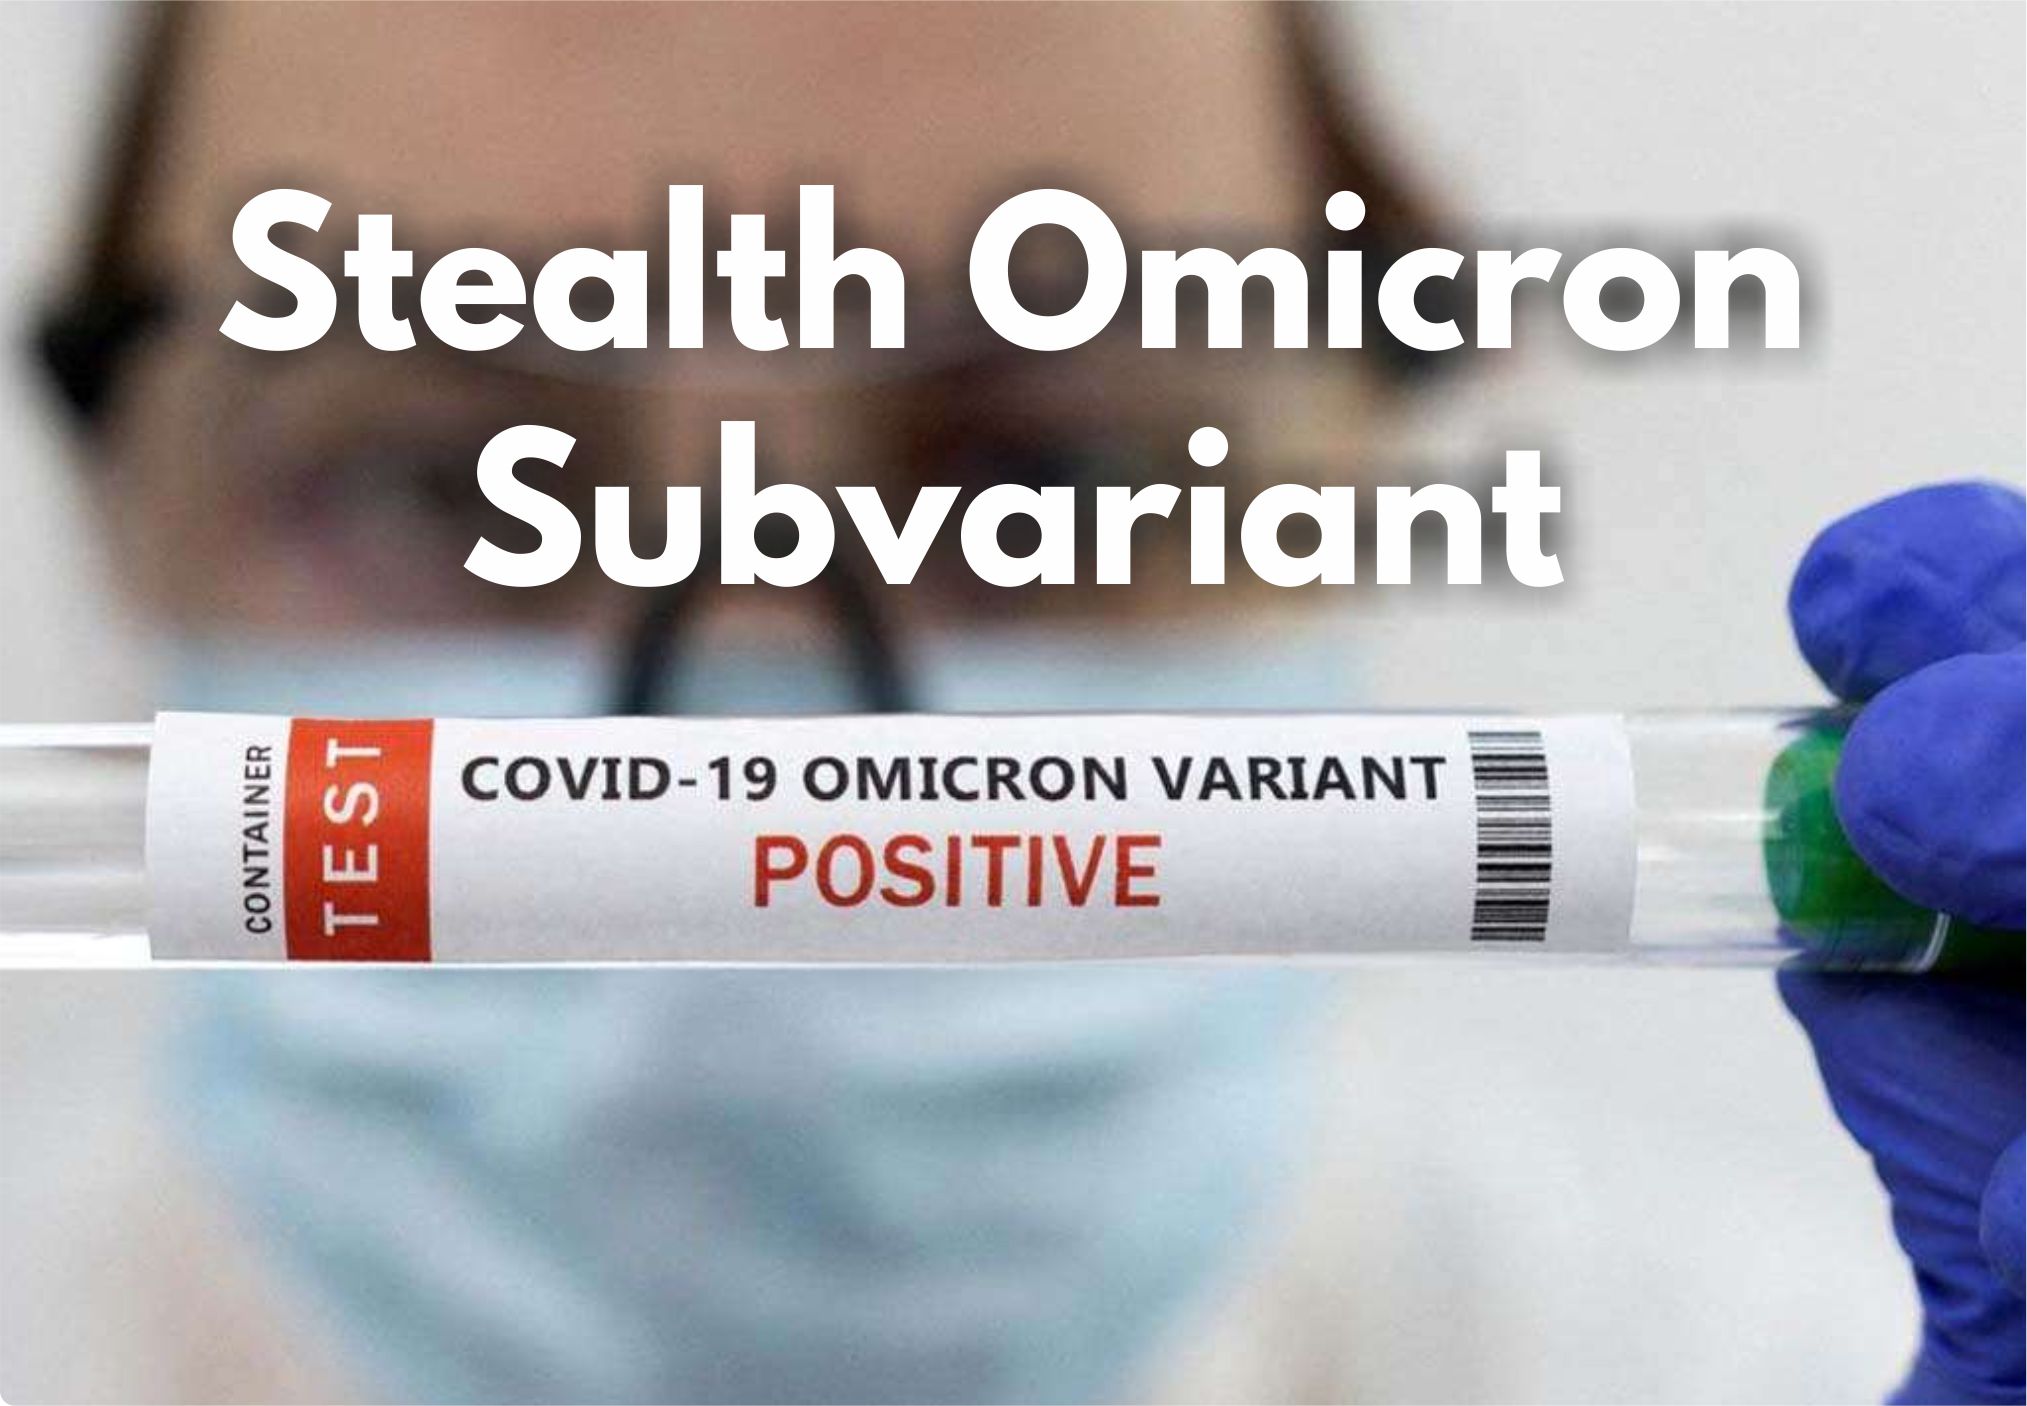 Stealth Omicron Subvariant, its Symptoms, Cases, and Death Rate